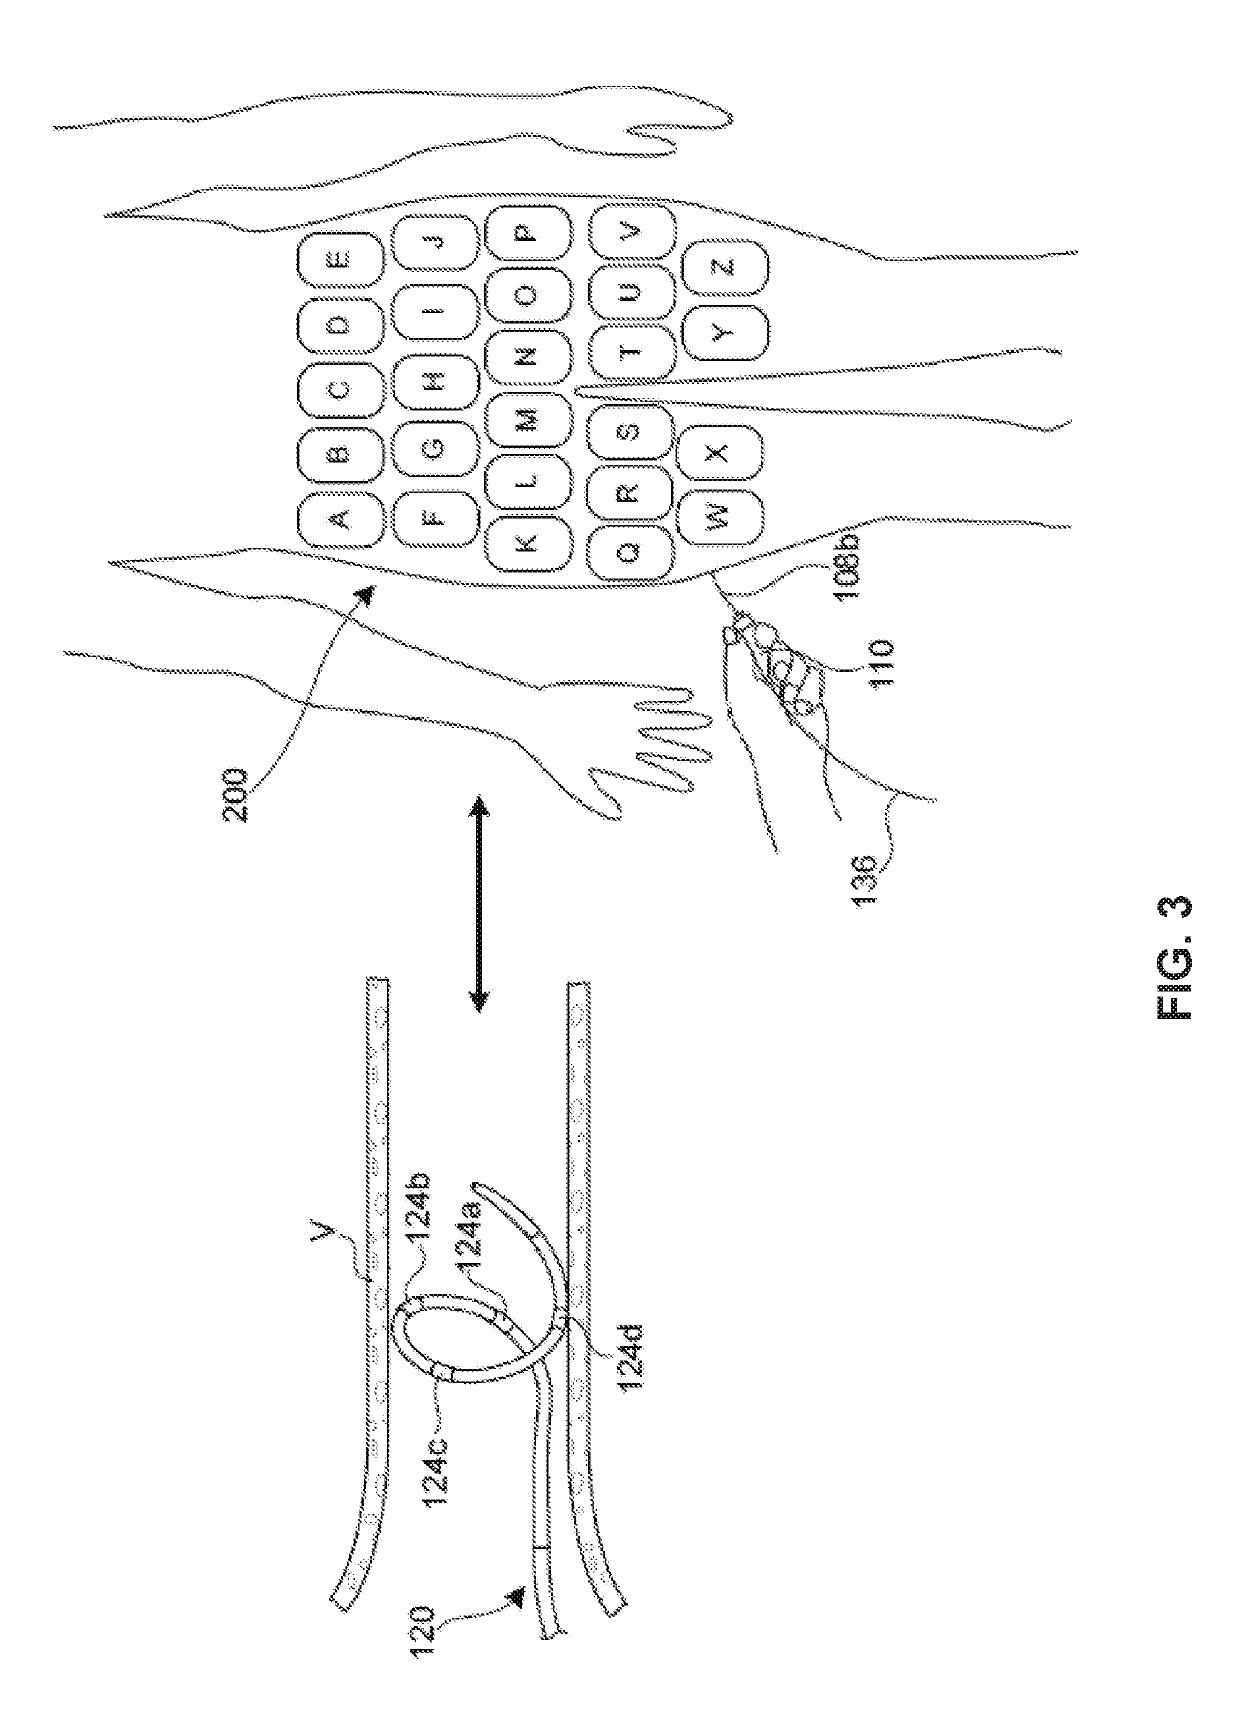 Systems, devices, and associated methods for neuromodulation in heterogeneous tissue environments